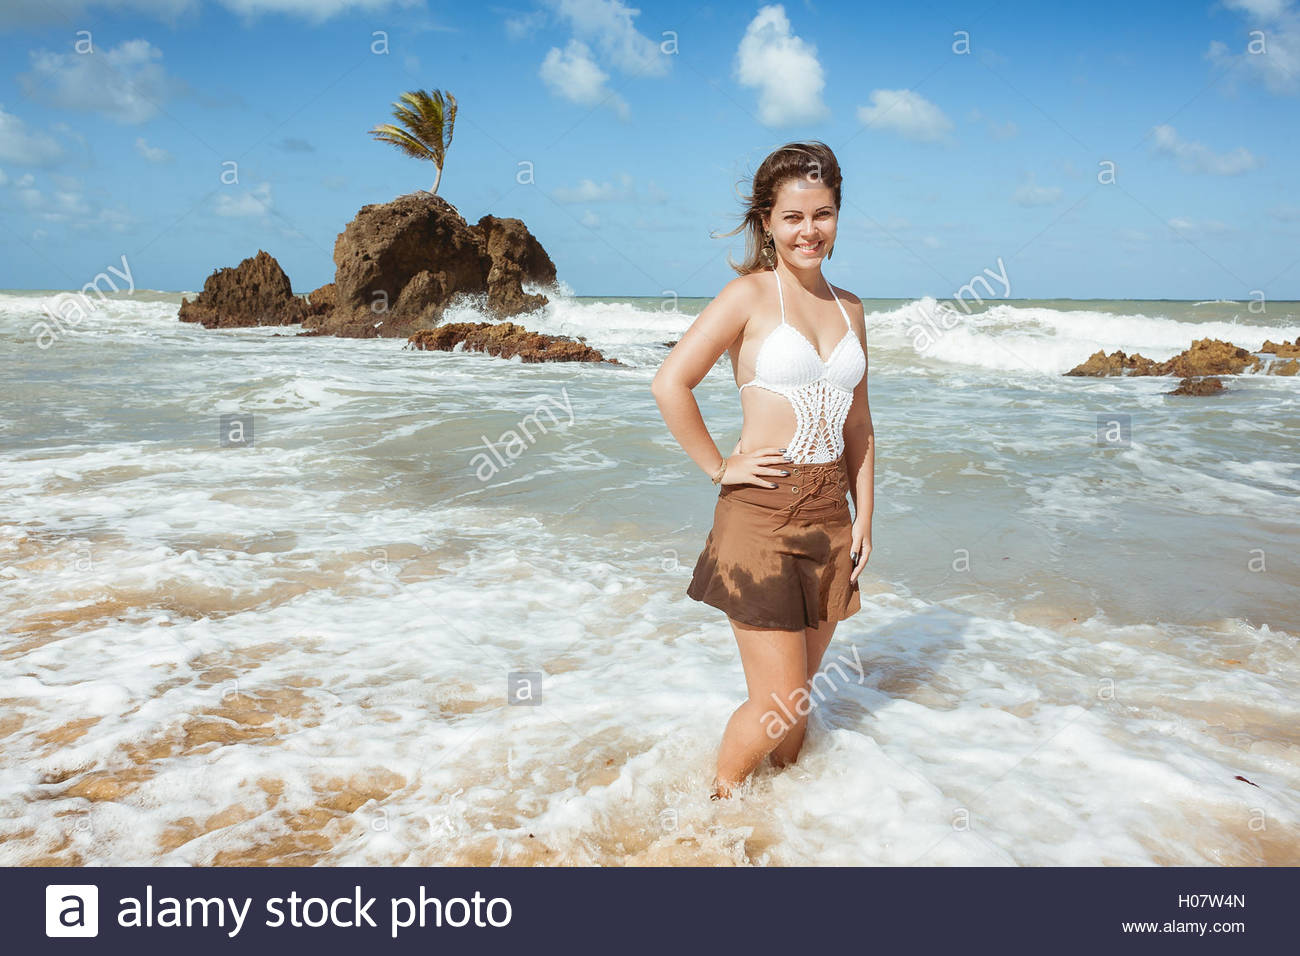 Woman In Tambaba Beach In Brazil Known For Allowing The Practice Of Stock Photo Royalty Free